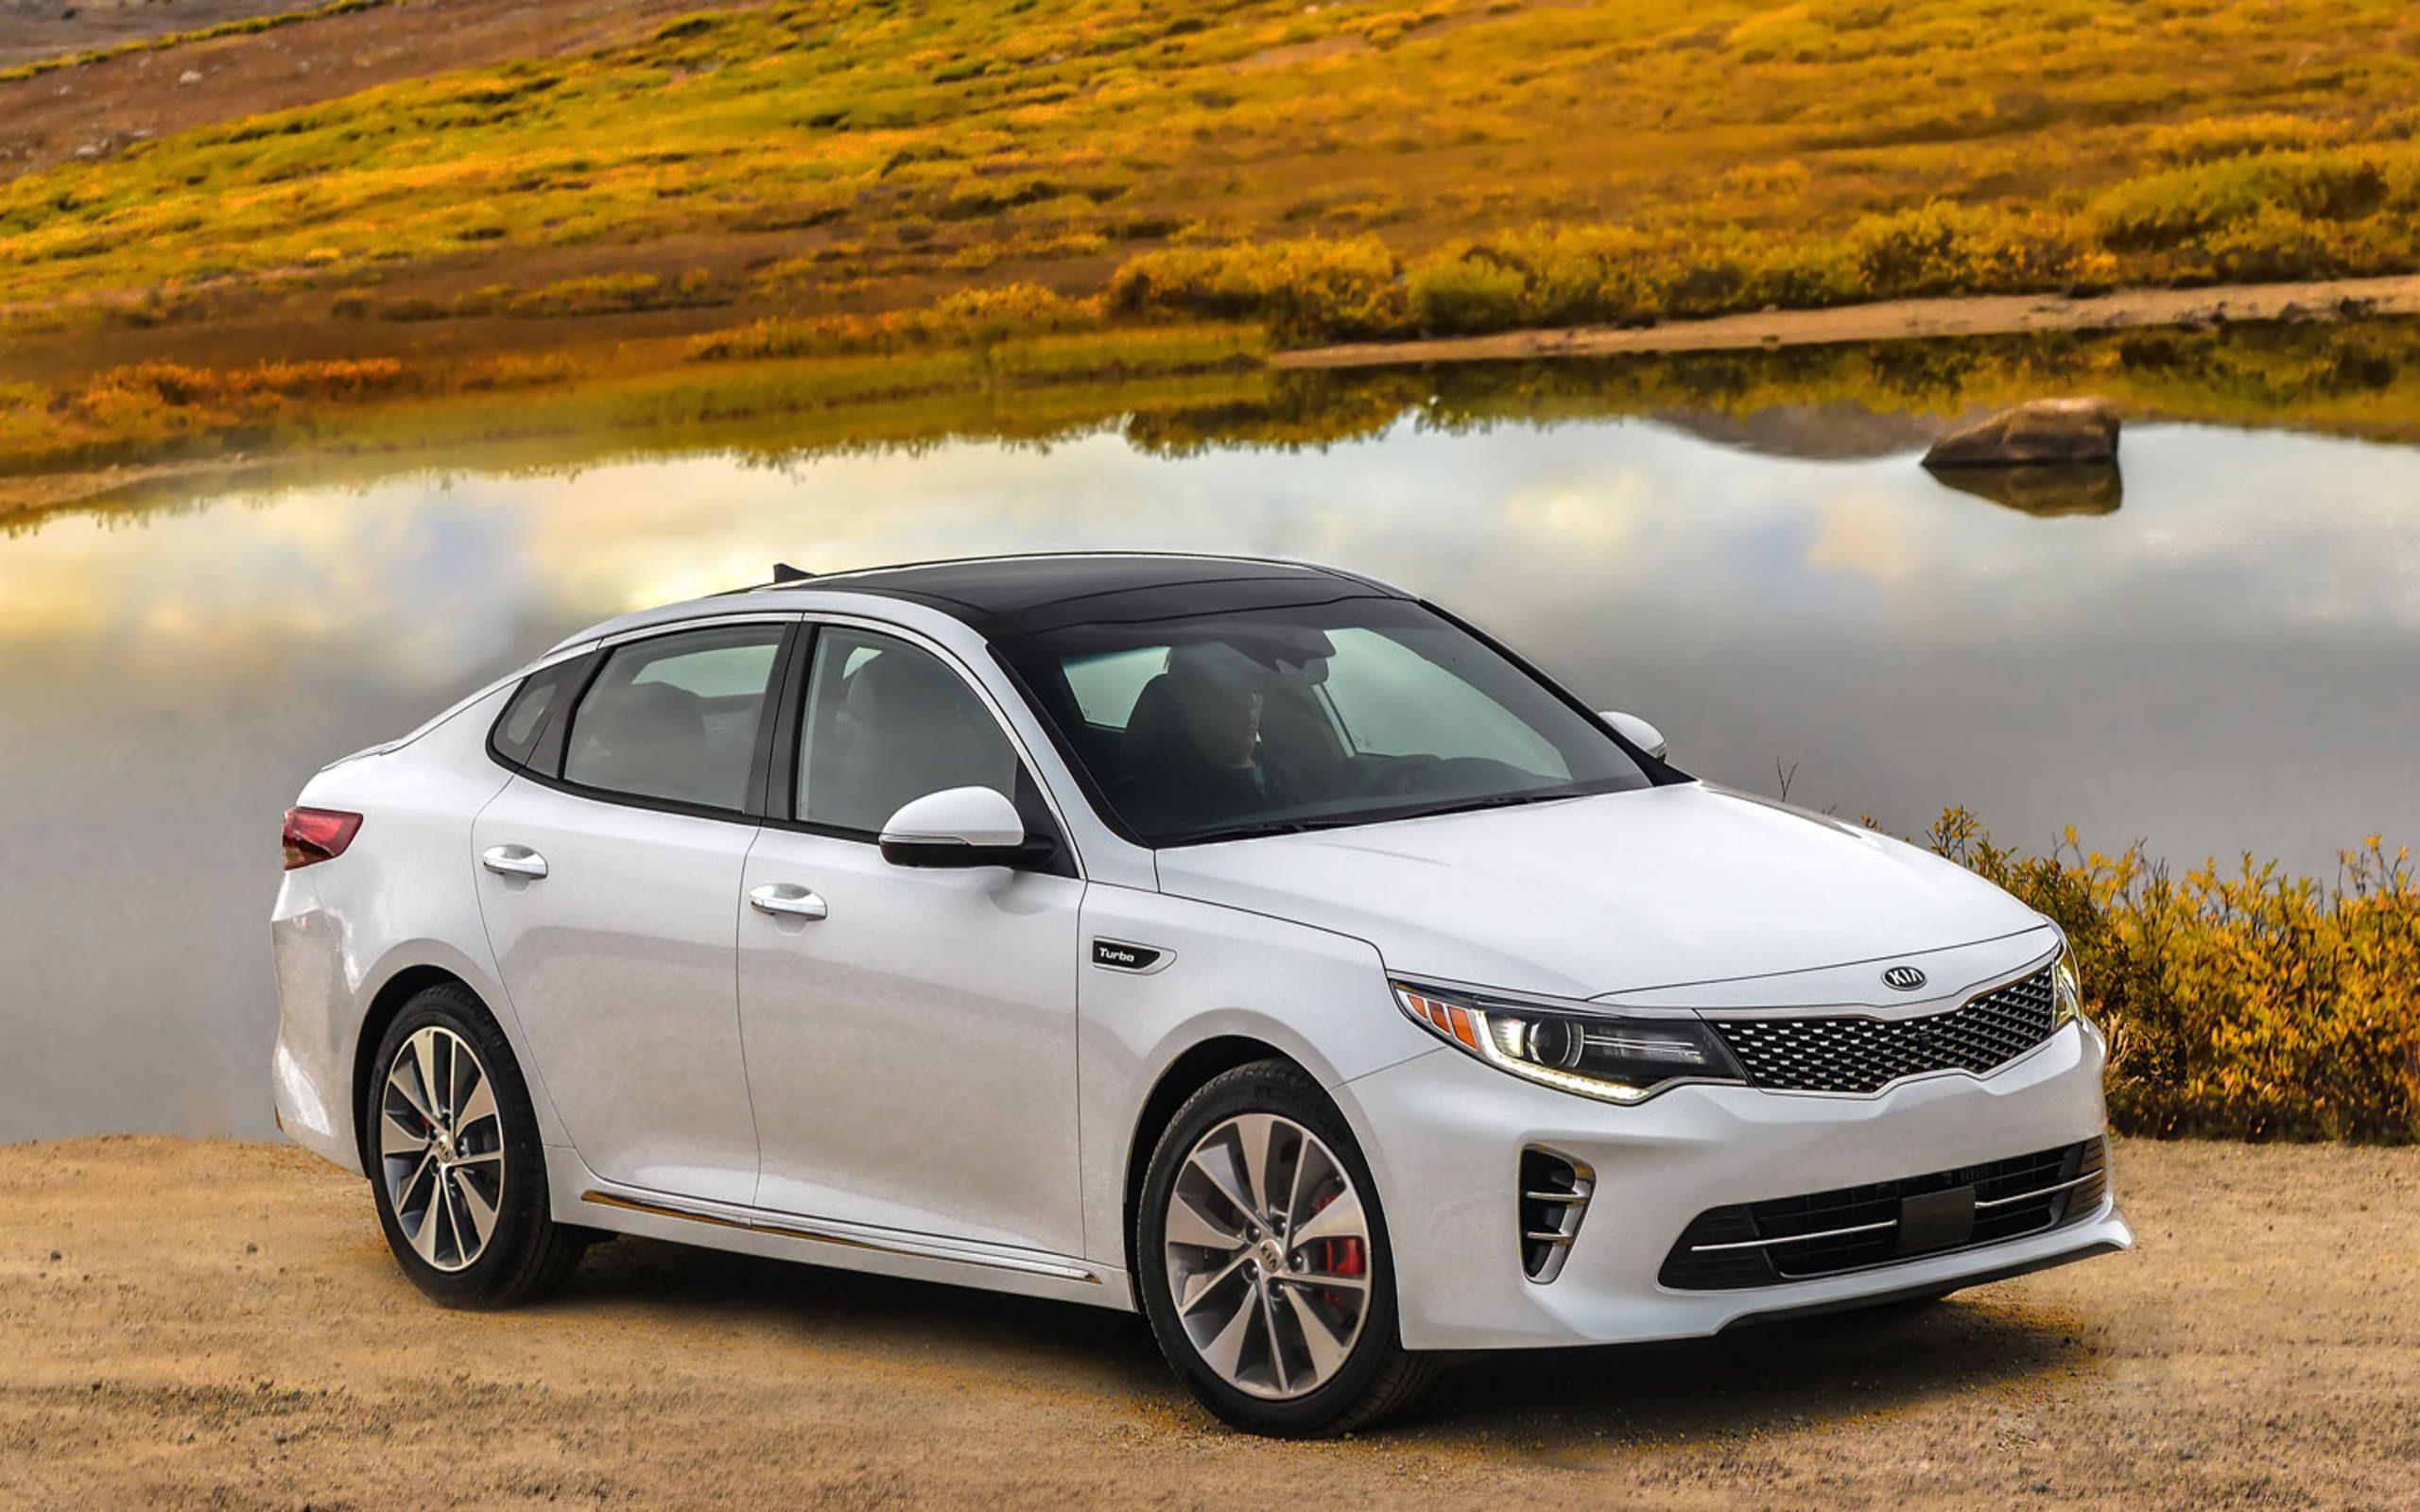 Kia Optima SX Limited essentials: Feature-rich, love-it-or-hate-it styling